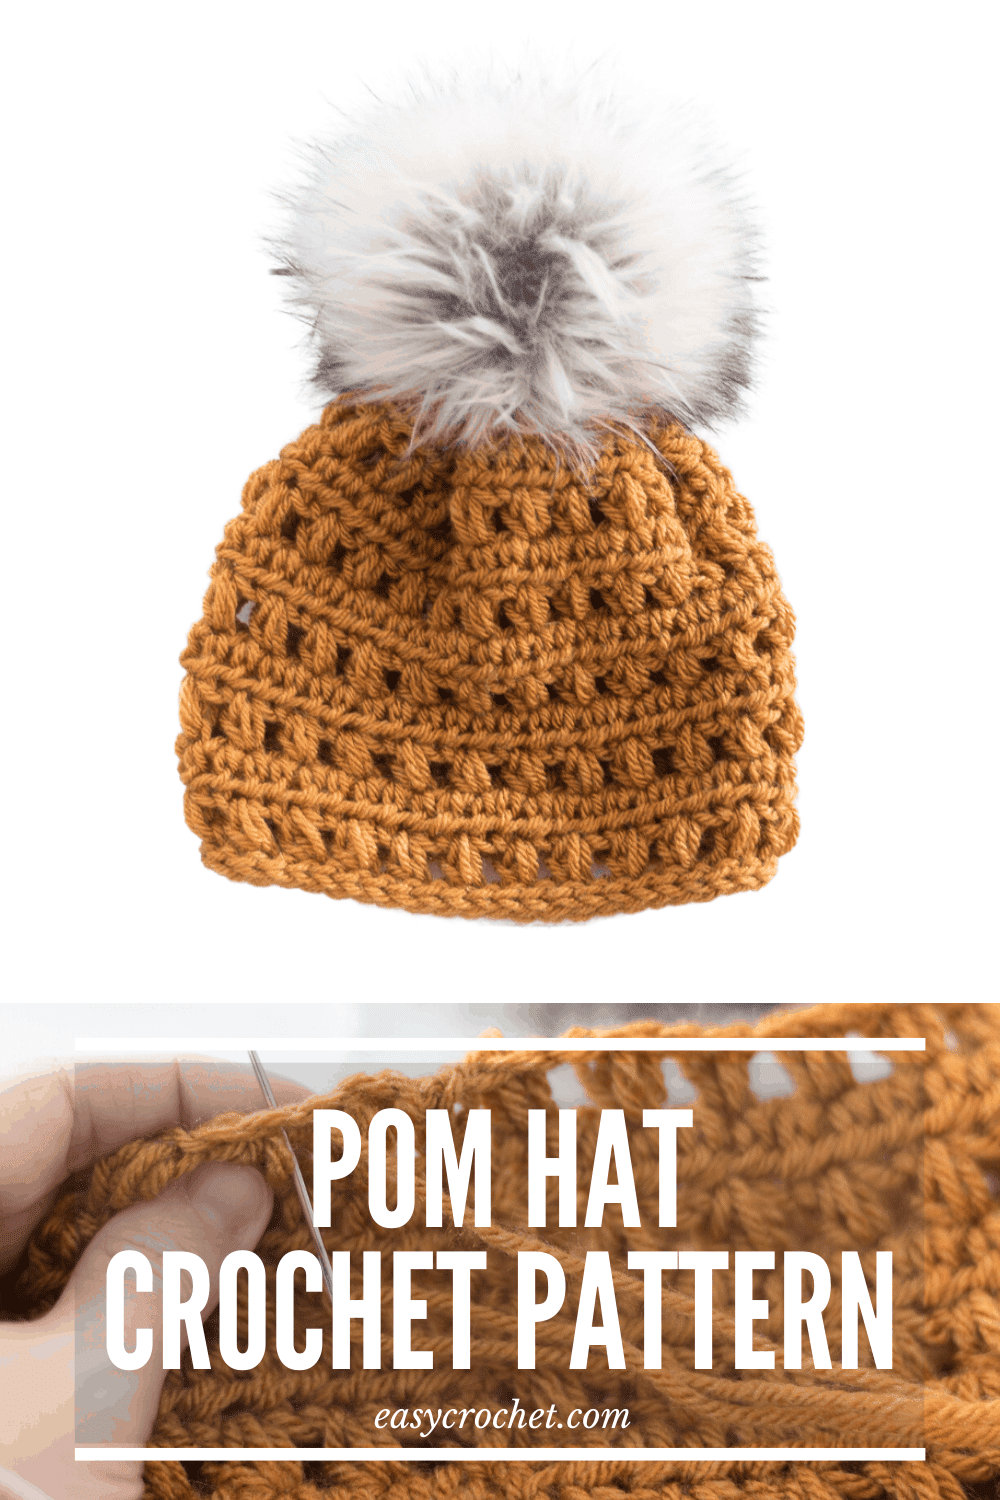 Crochet this pom hat using our FREE crochet hat pattern. Easy step-by-step instructions to make this beanie today! via @easycrochetcom